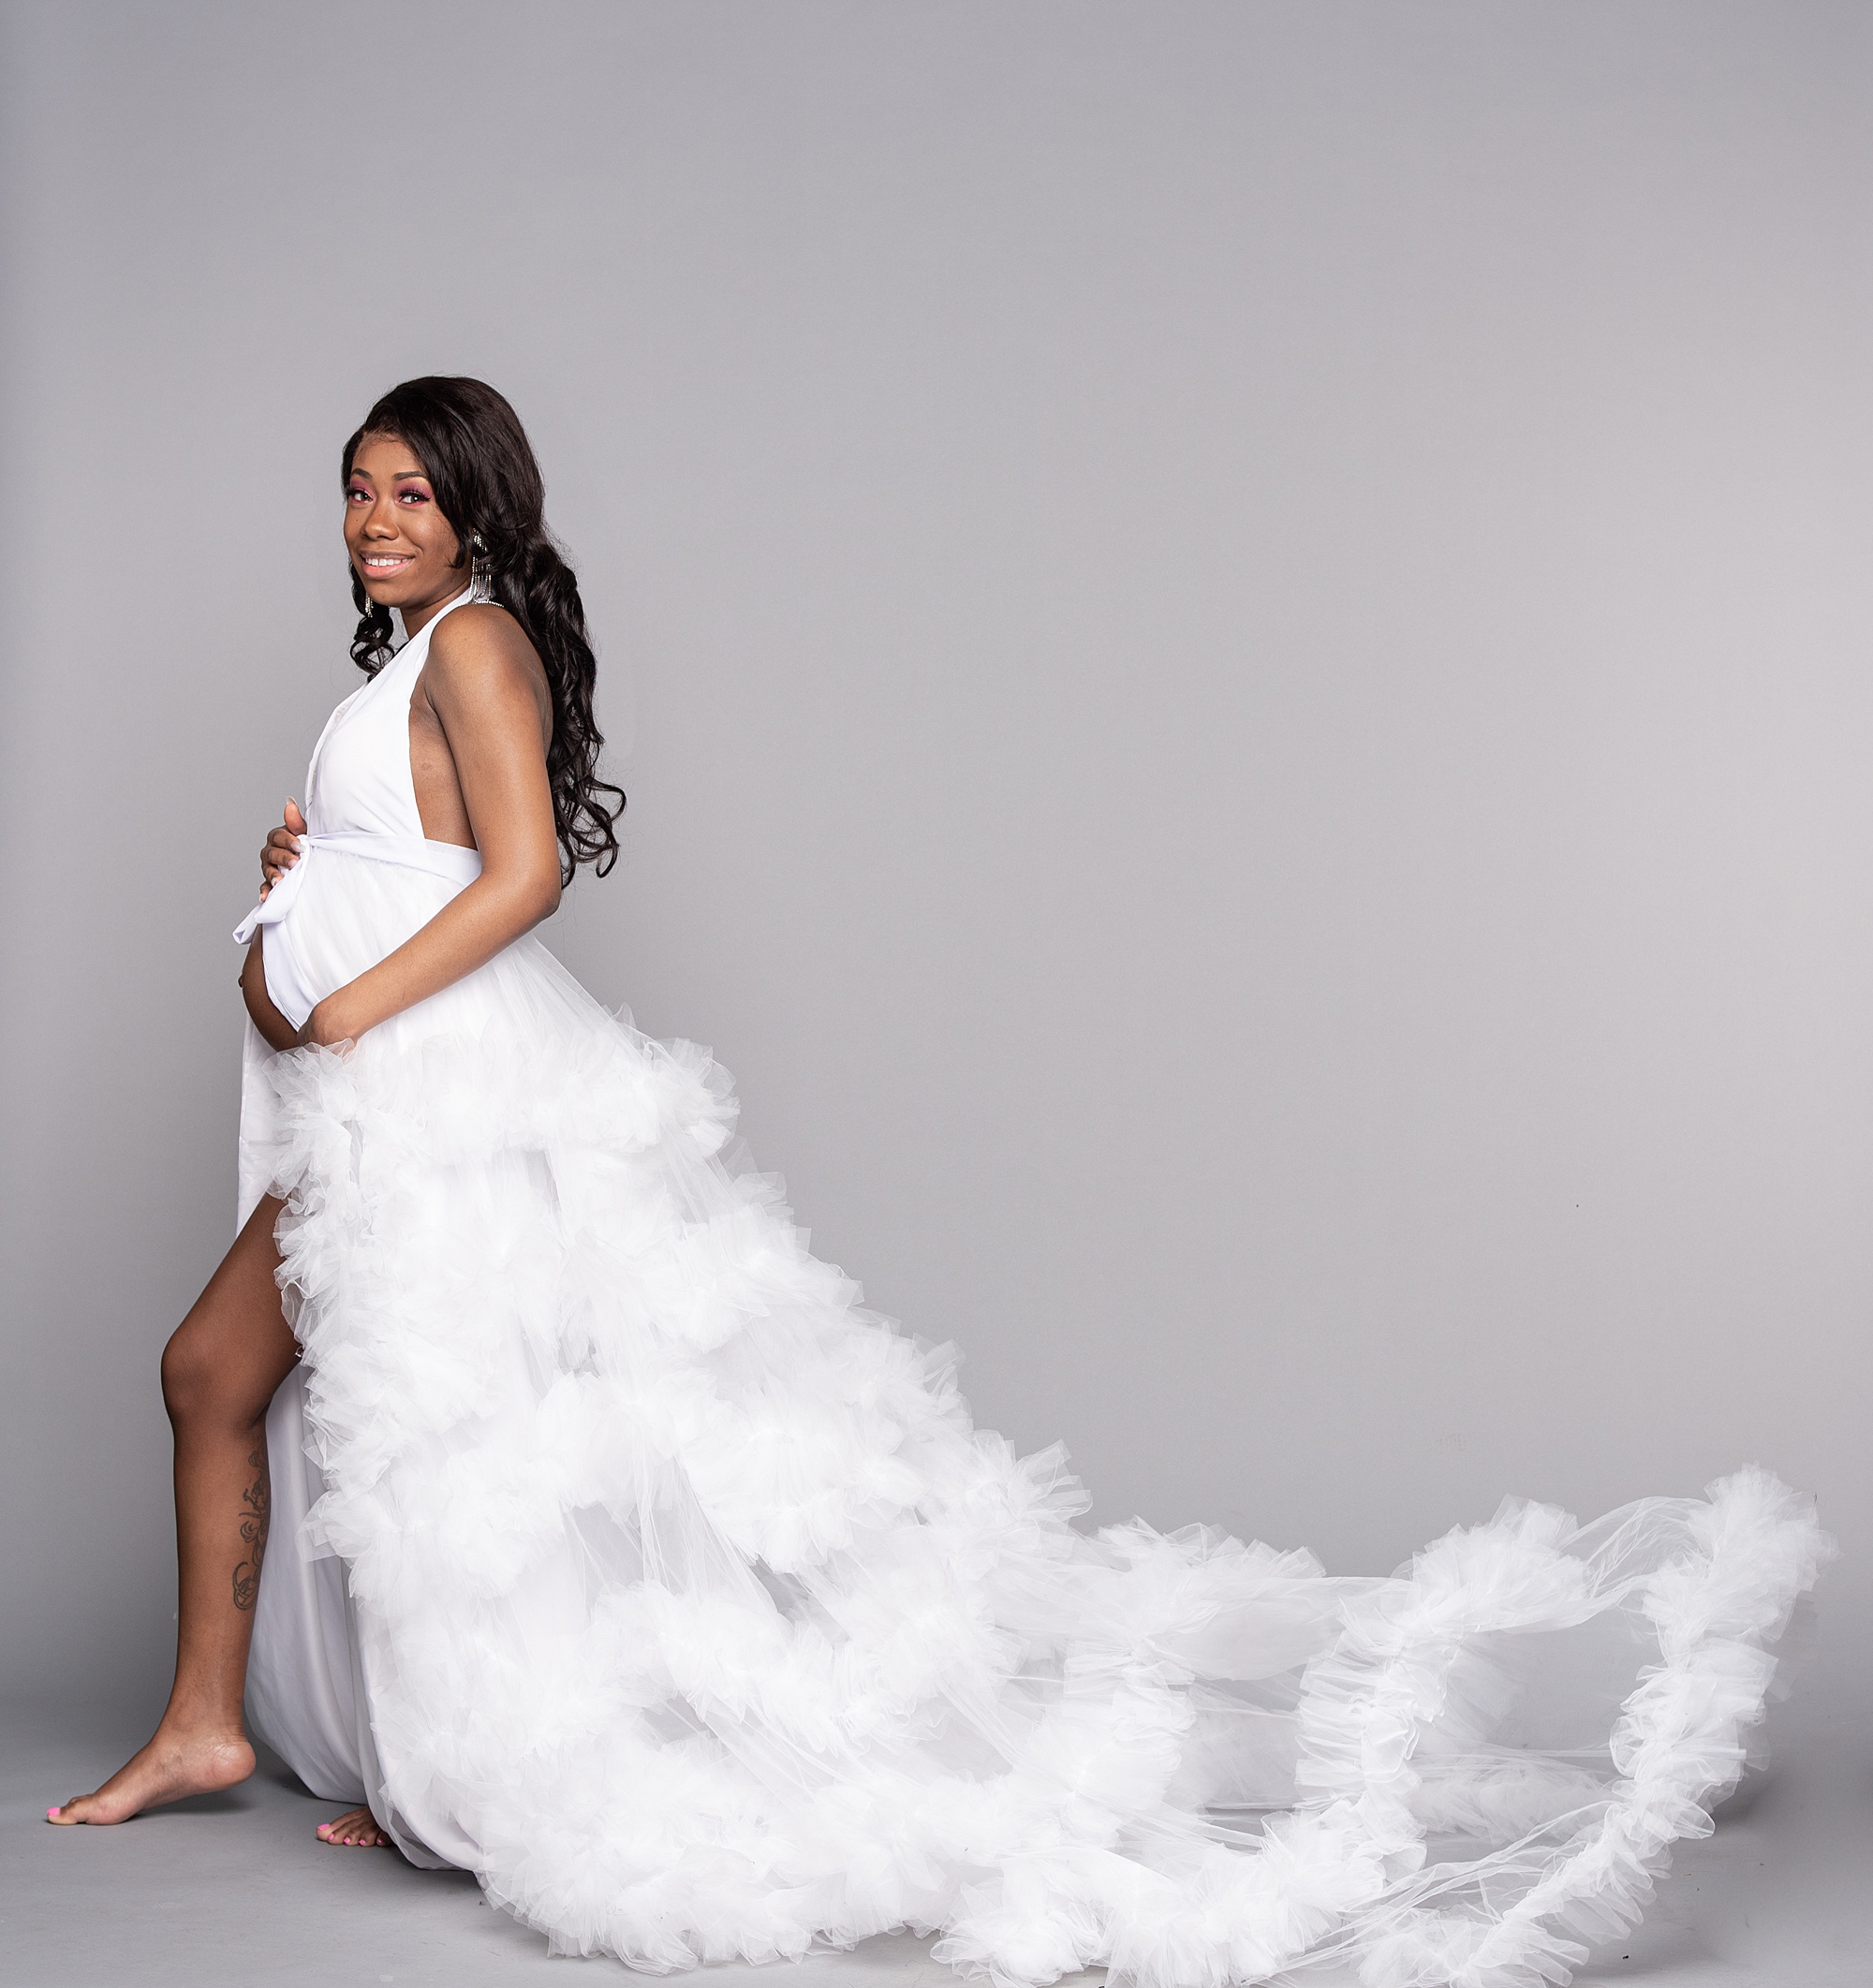 Washington DC studio maternity portraits of mother in white gown